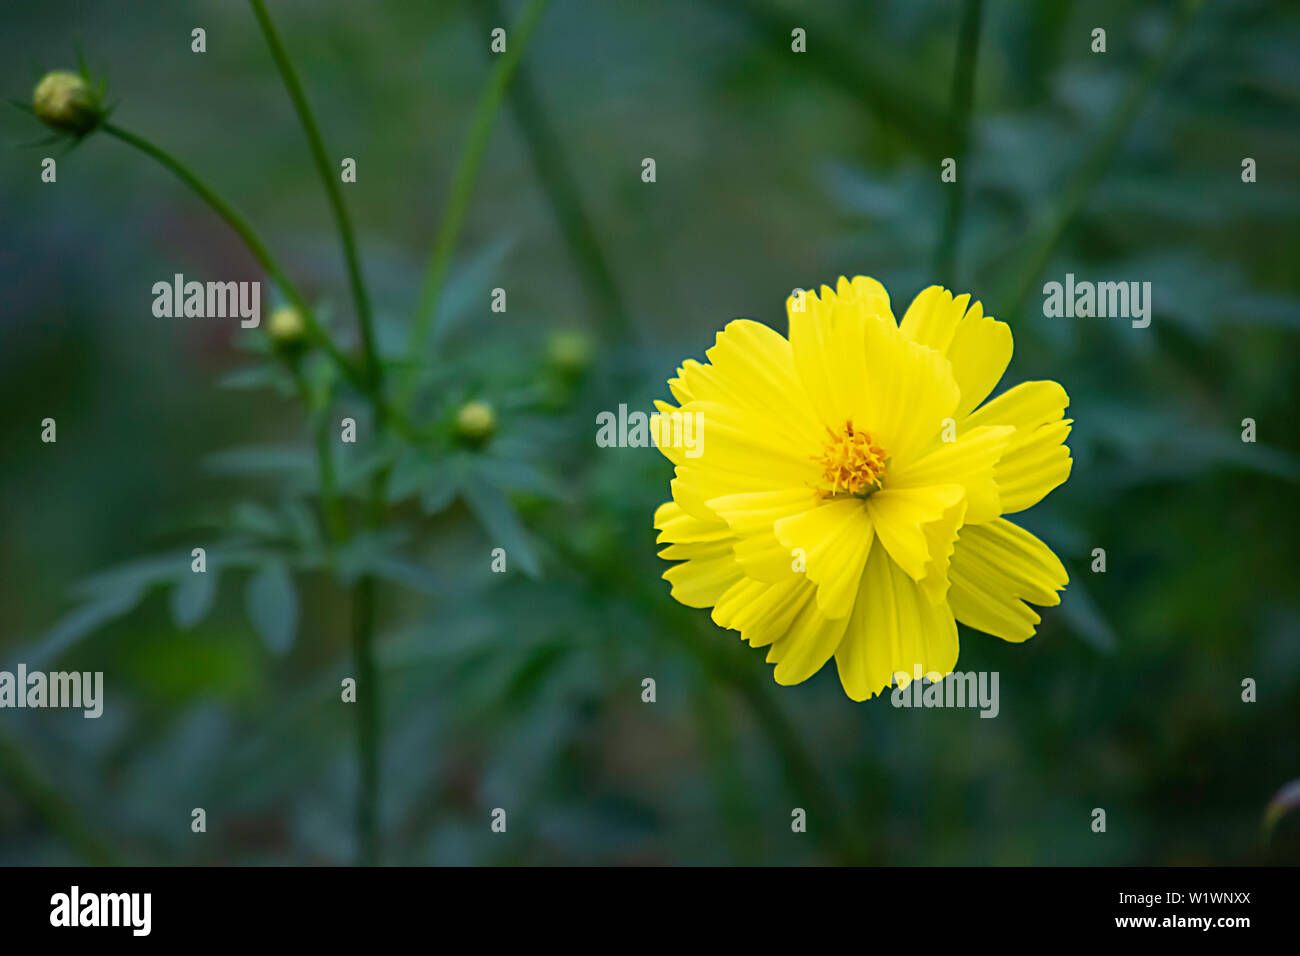 Yellow flower or Wedelia trilobata (L.) Hitchc in garden. Stock Photo